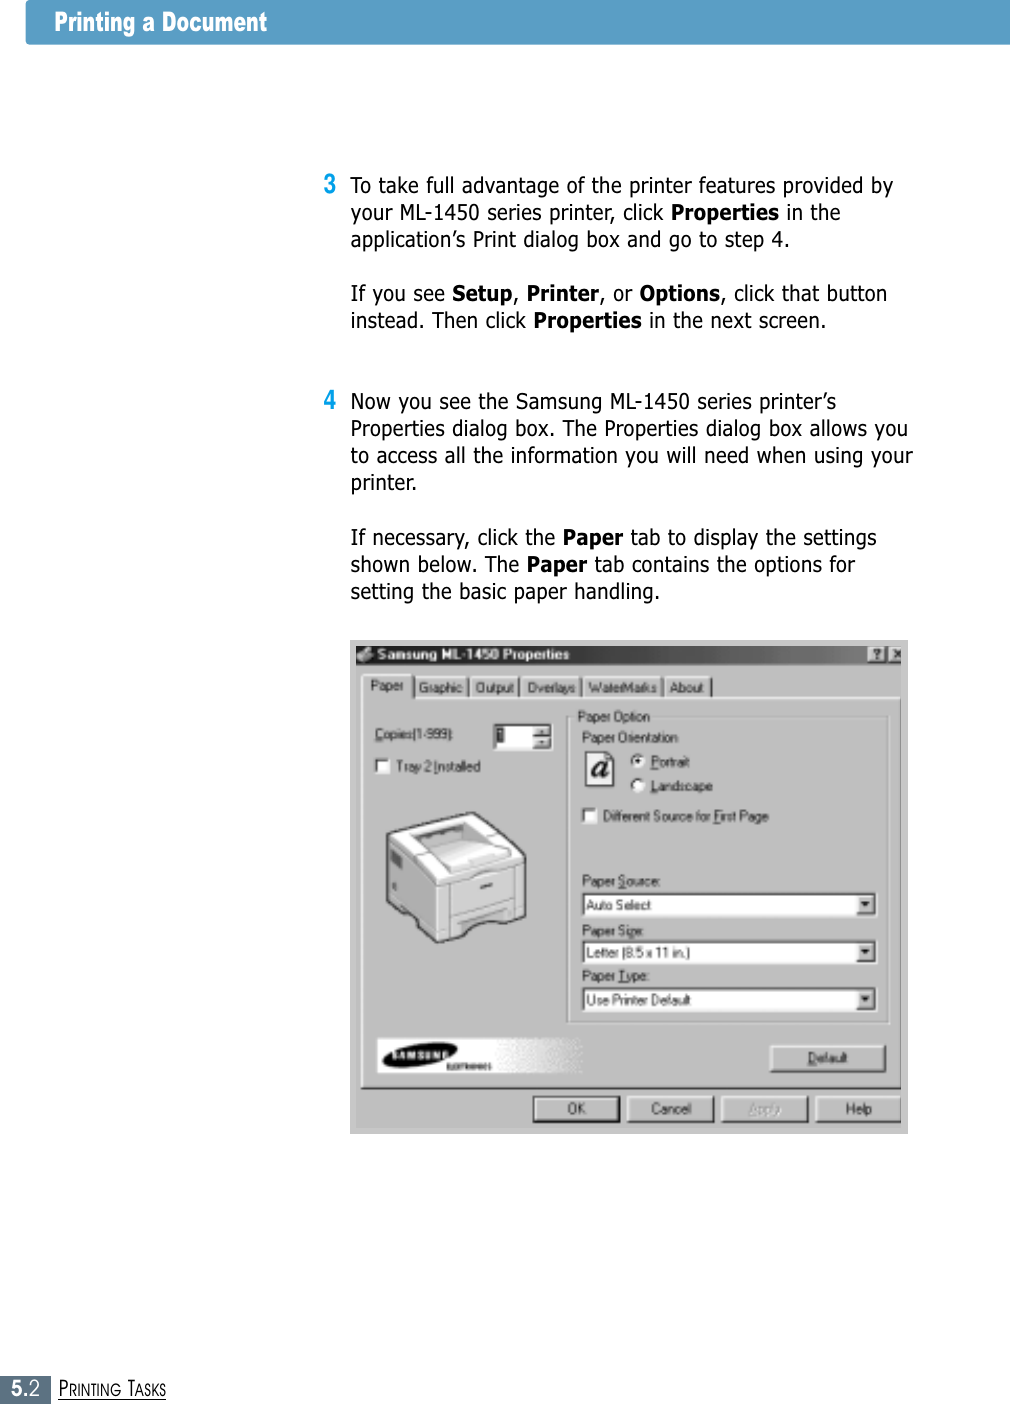 5.2PRINTING TASKSPrinting a Document3To take full advantage of the printer features provided byyour ML-1450 series printer, click Properties in theapplication’s Print dialog box and go to step 4. If you see Setup, Printer, or Options, click that buttoninstead. Then click Properties in the next screen.4Now you see the Samsung ML-1450 series printer’sProperties dialog box. The Properties dialog box allows youto access all the information you will need when using yourprinter.If necessary, click the Paper tab to display the settingsshown below. The Paper tab contains the options forsetting the basic paper handling.